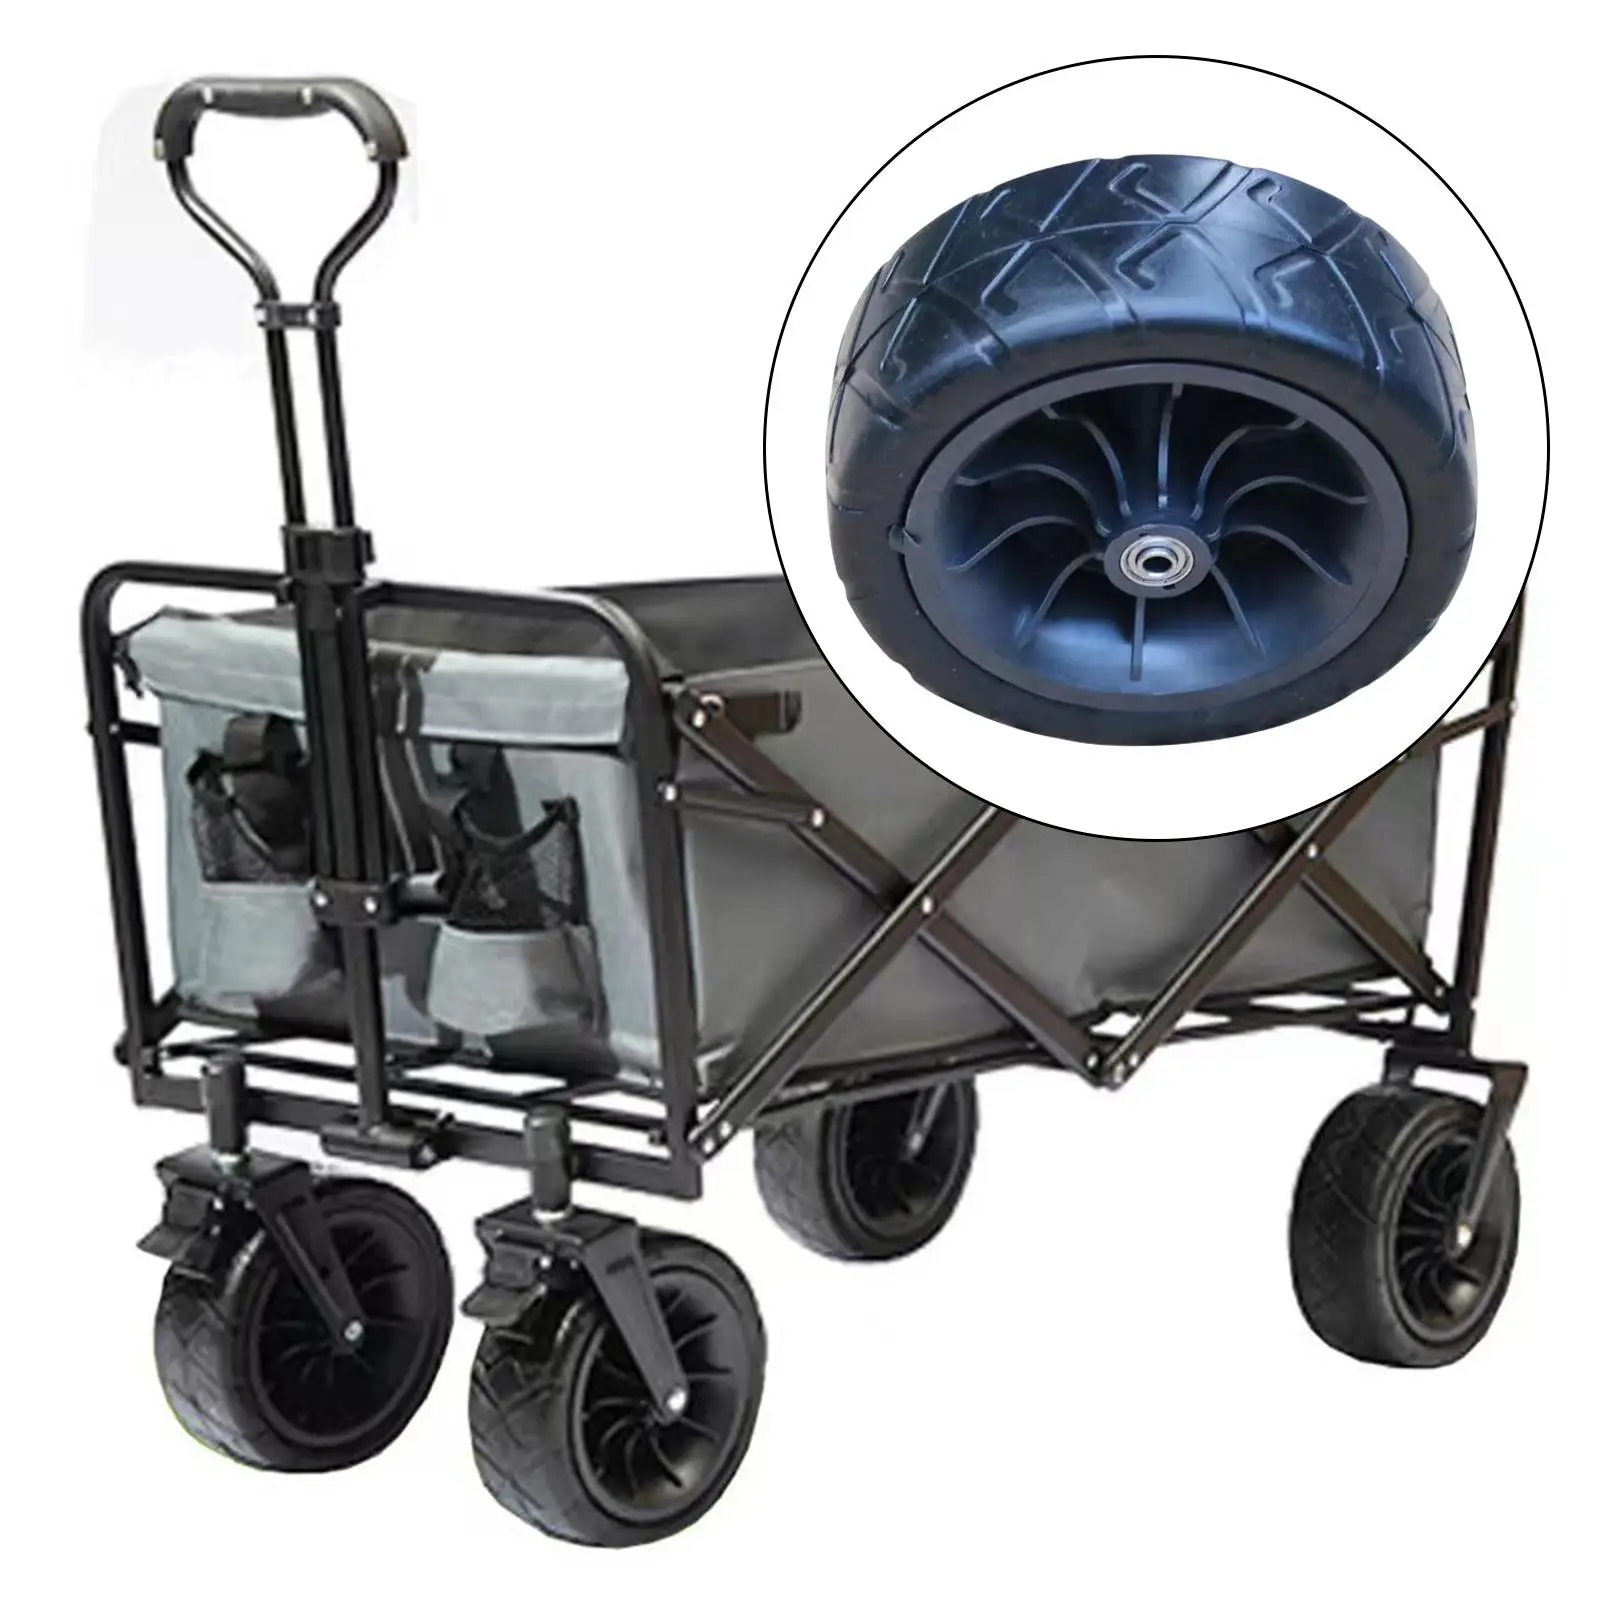 Replacement Wheel for Wagon Cart Hand Truck Outdoor Camping Wagon Accessory